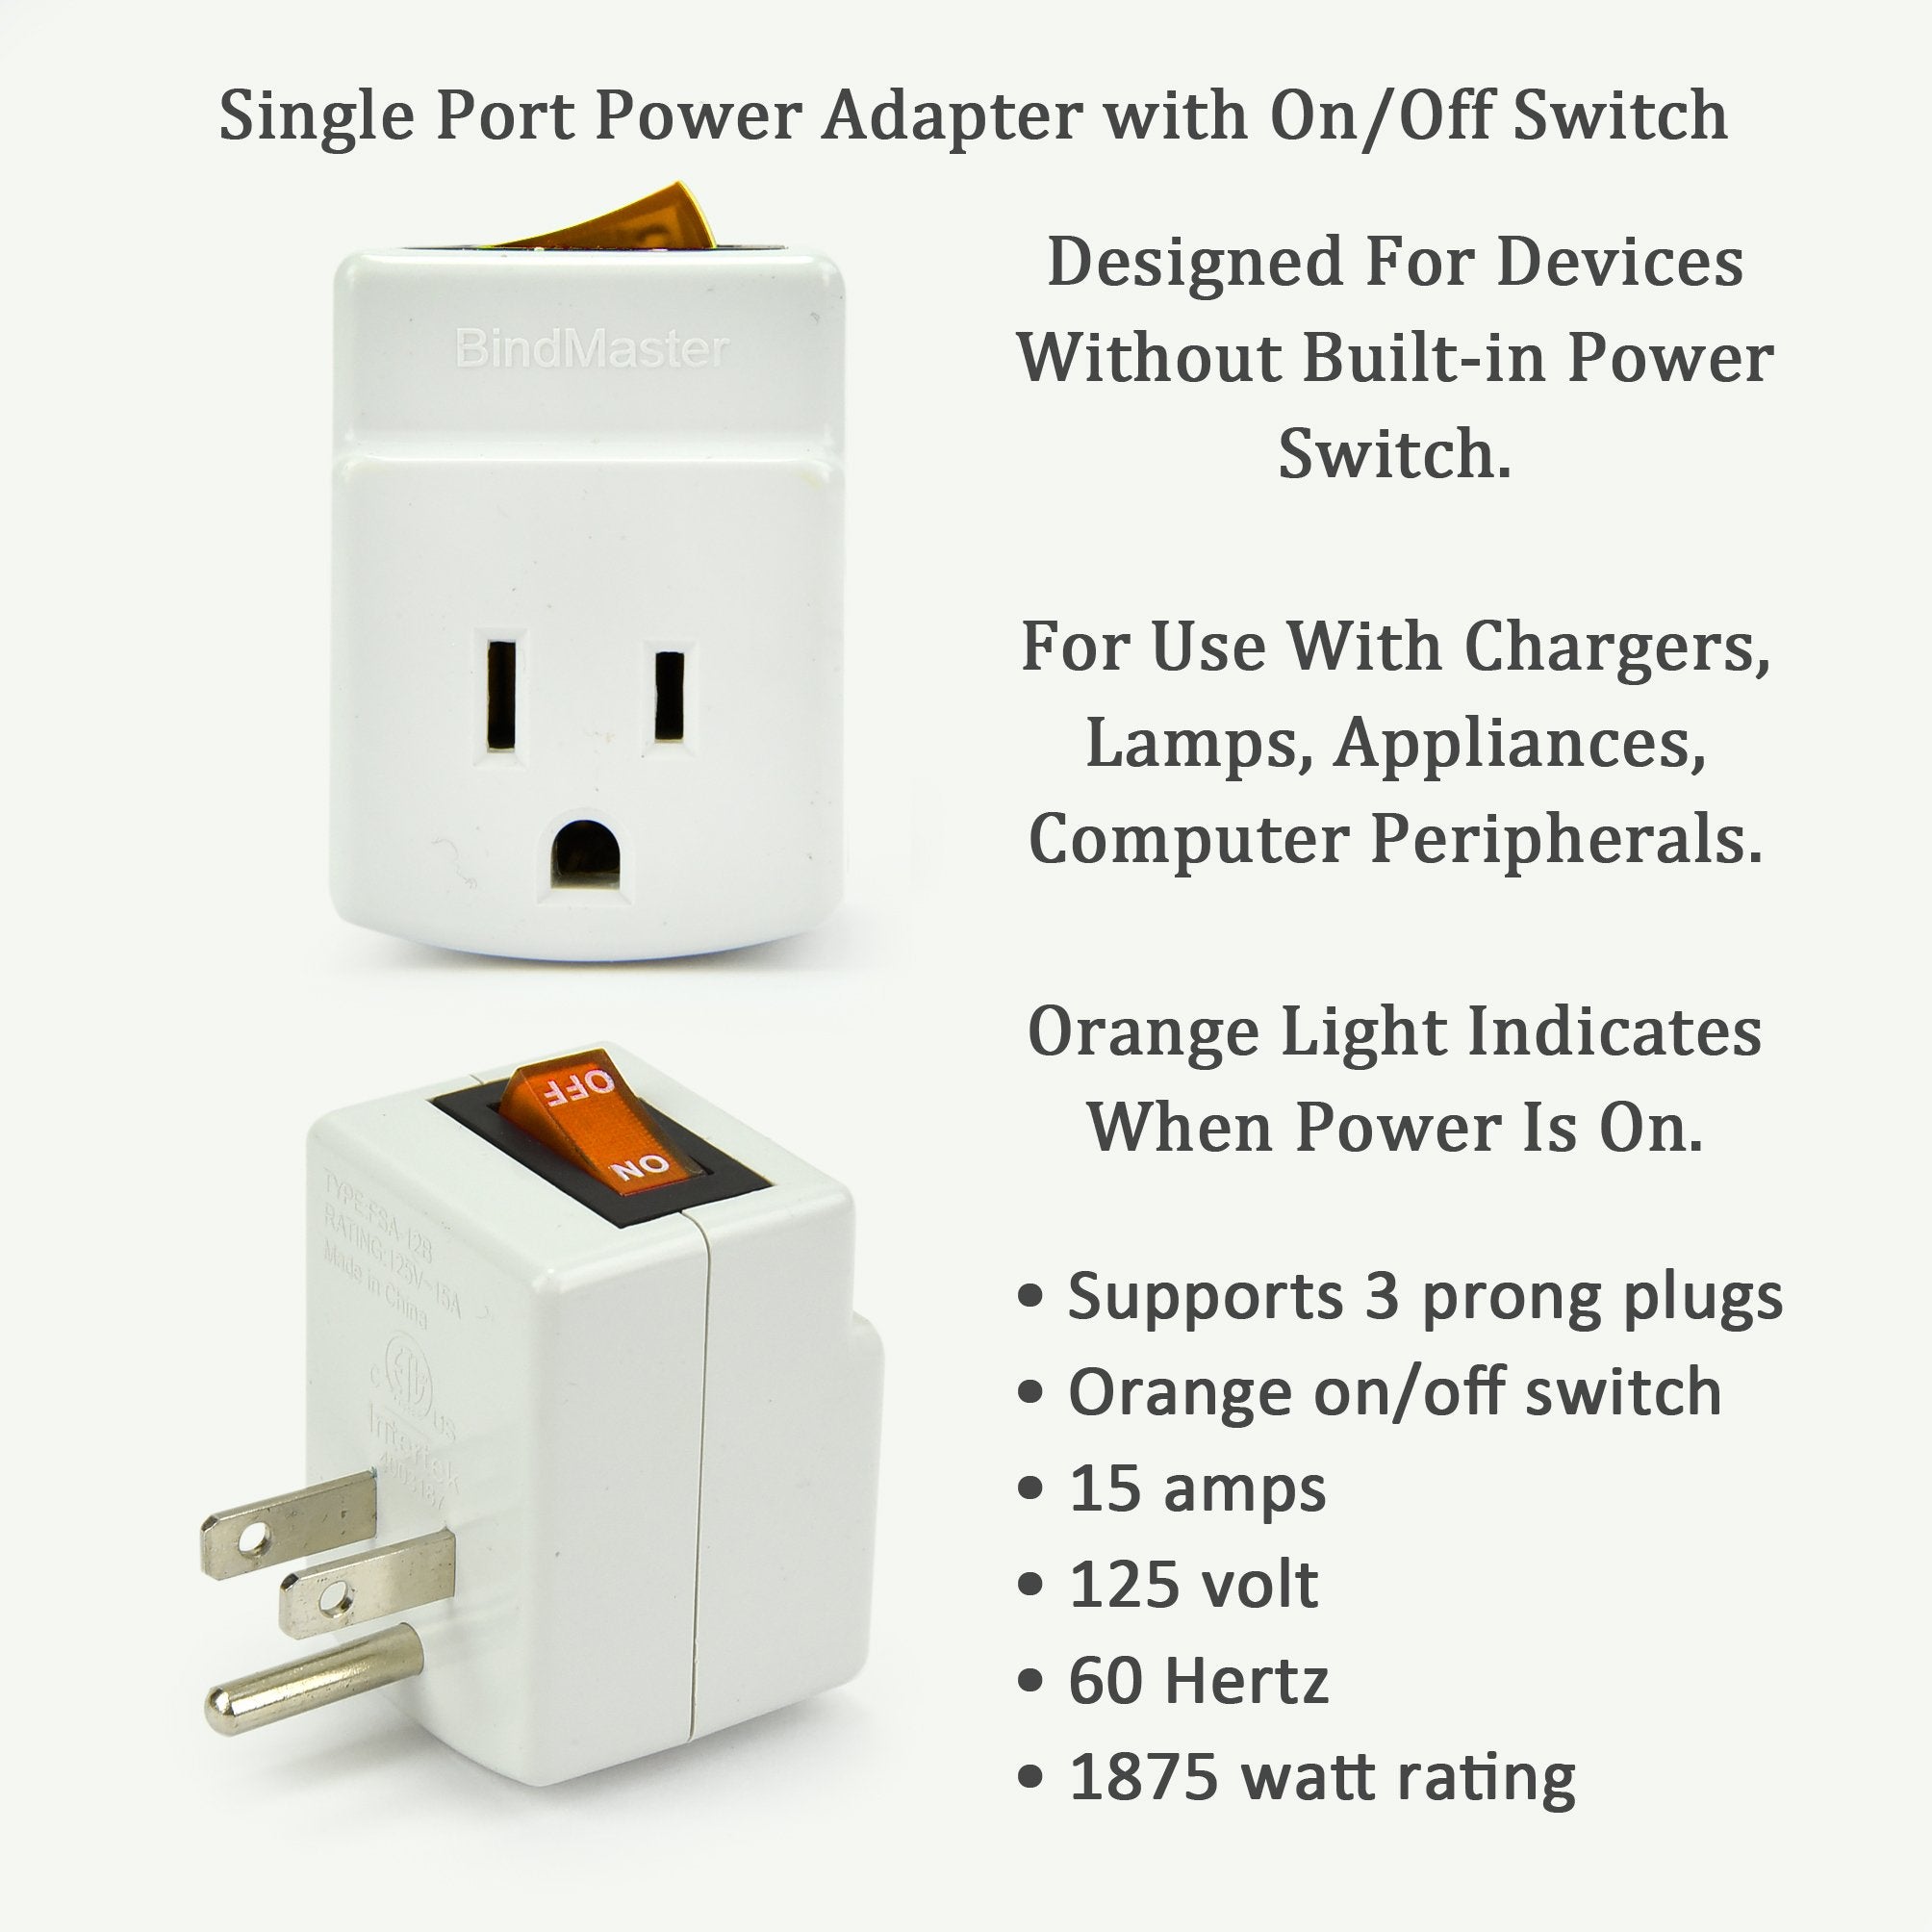 New! 3 Prong Grounded Single Port Power Adapter for Outlet with Orange Indicator On/Off Switch to be Energy Saving  - Like New